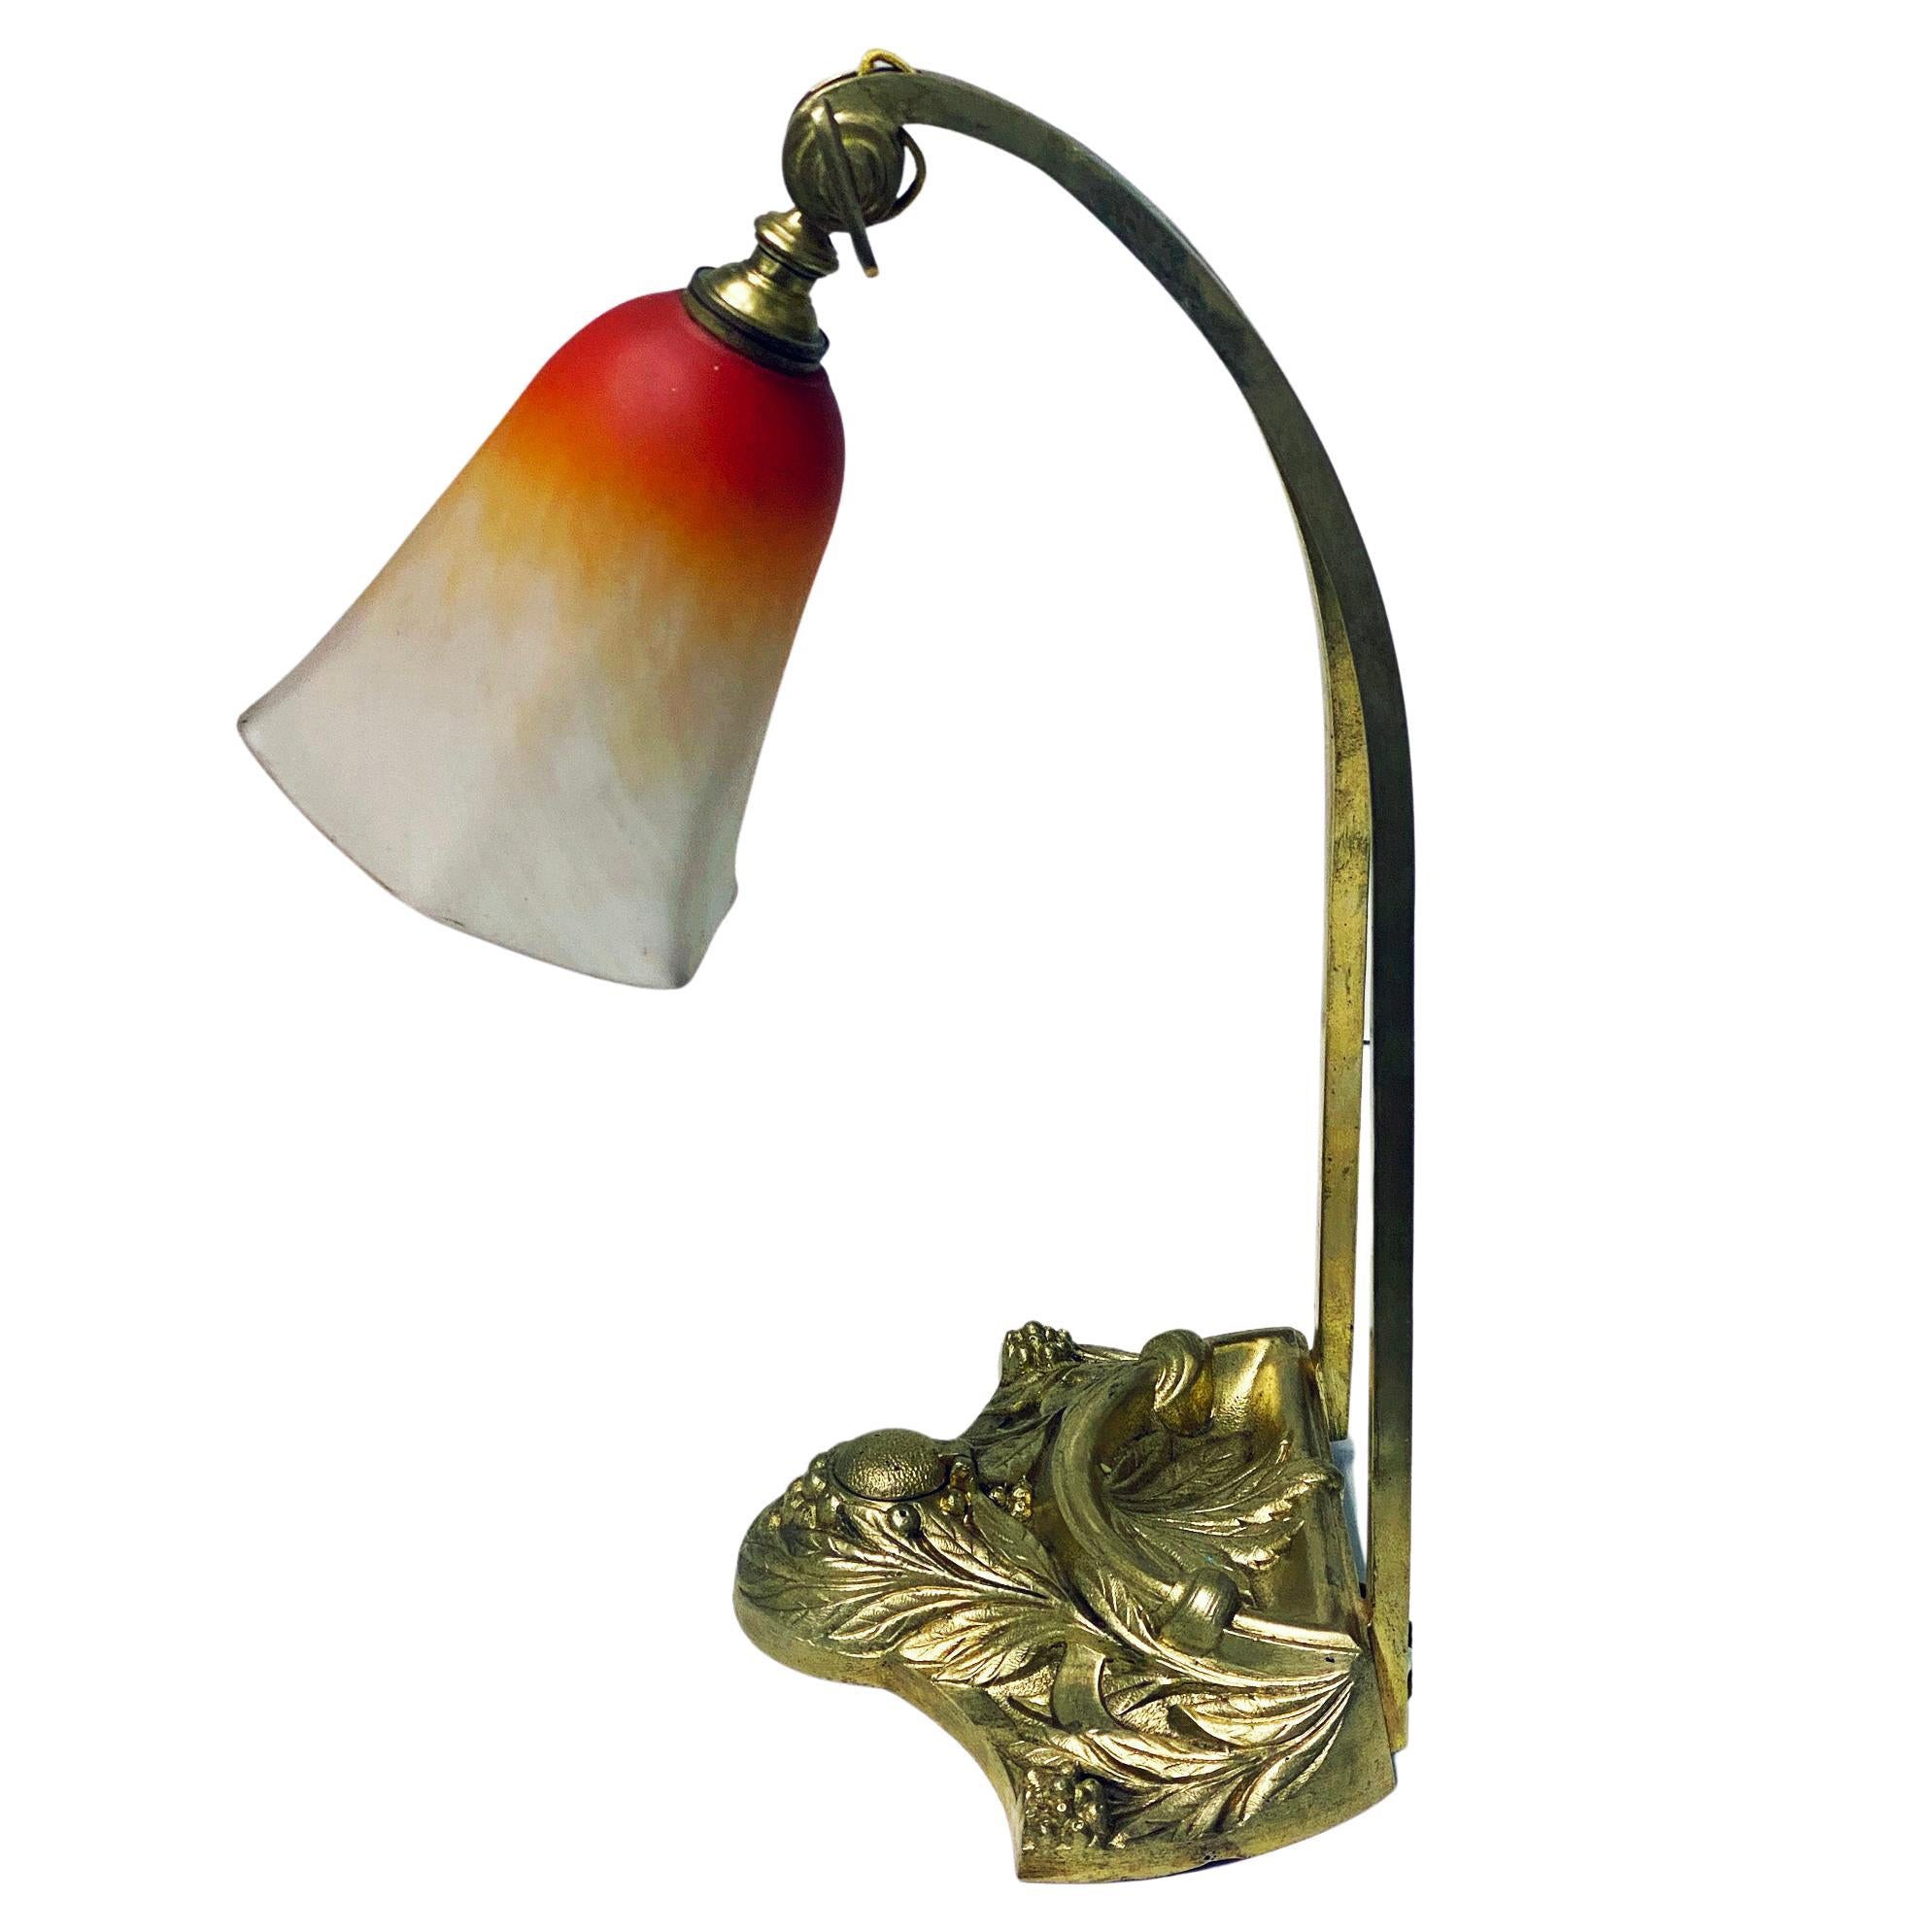 French Art Nouveau desk table lamp by Charles Schneider C. 1920